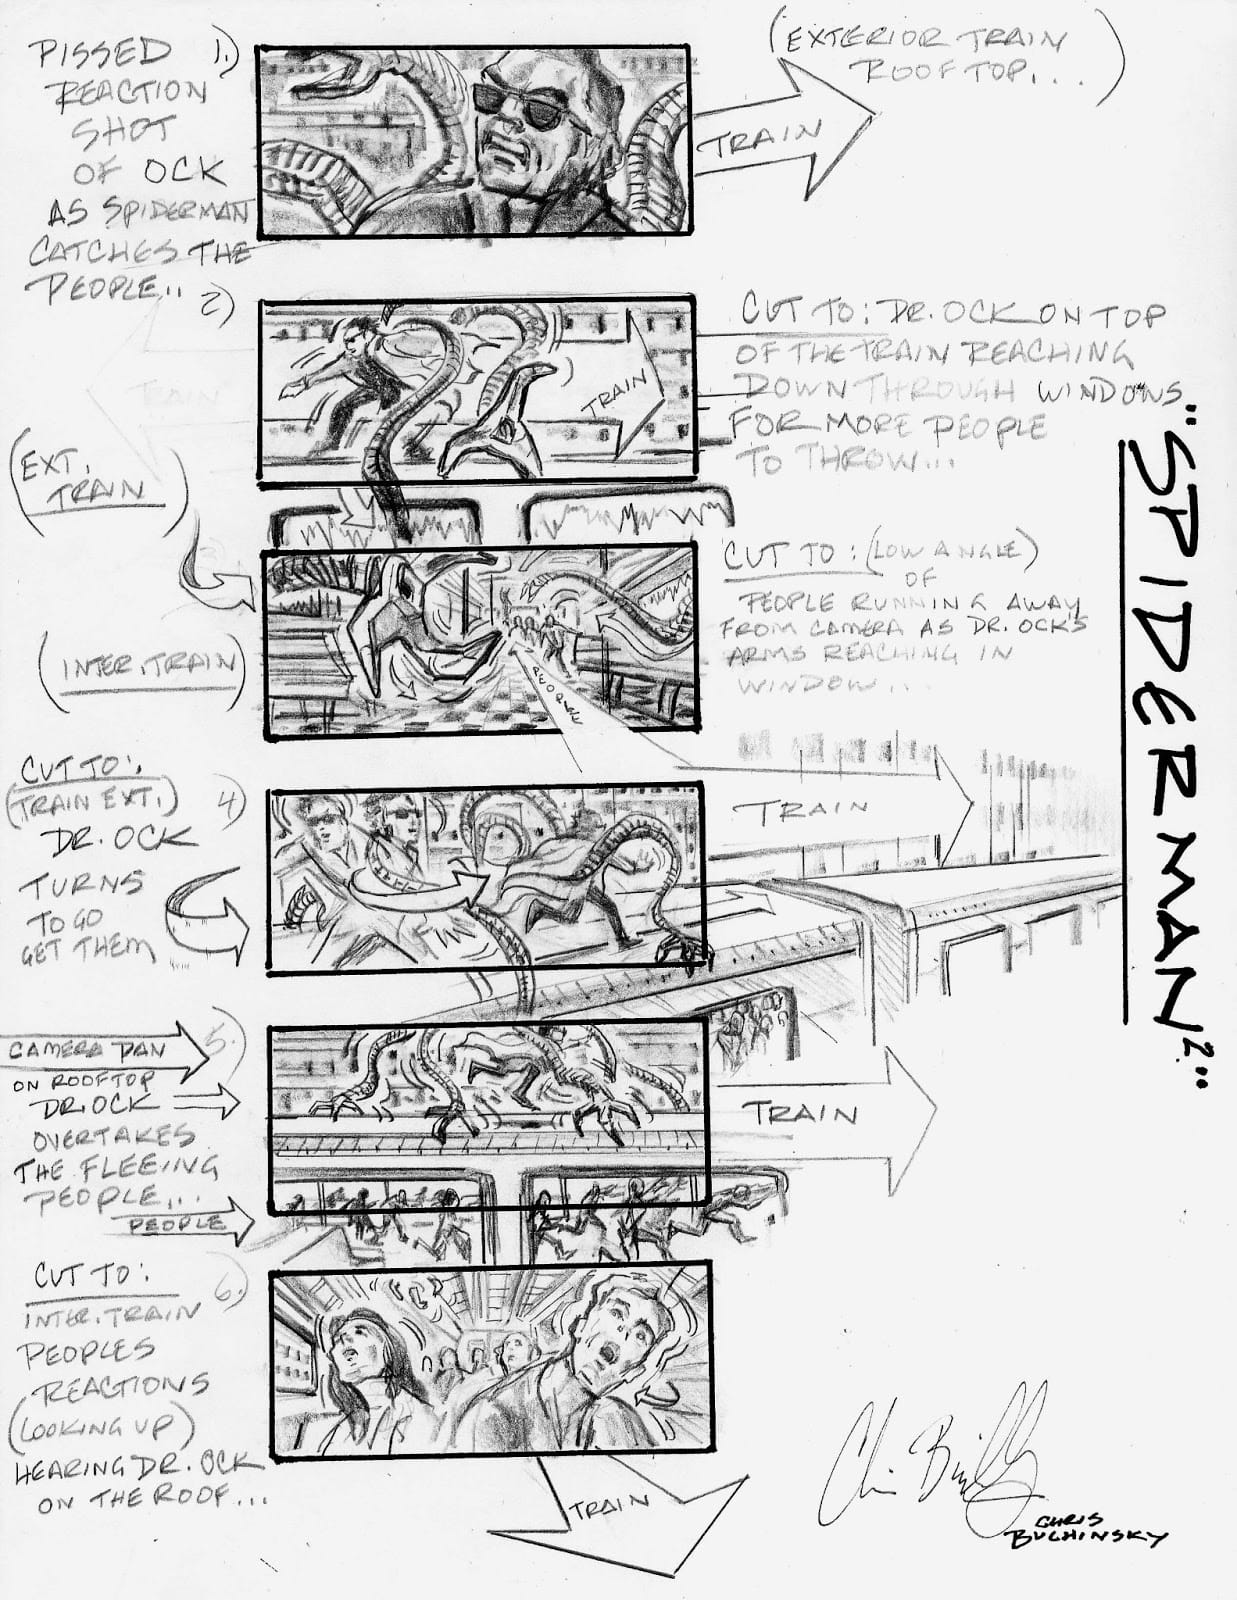 A storyboard of a scene in Spider-Man 2 depicting a battle between Dr. Octavius and Spiderman